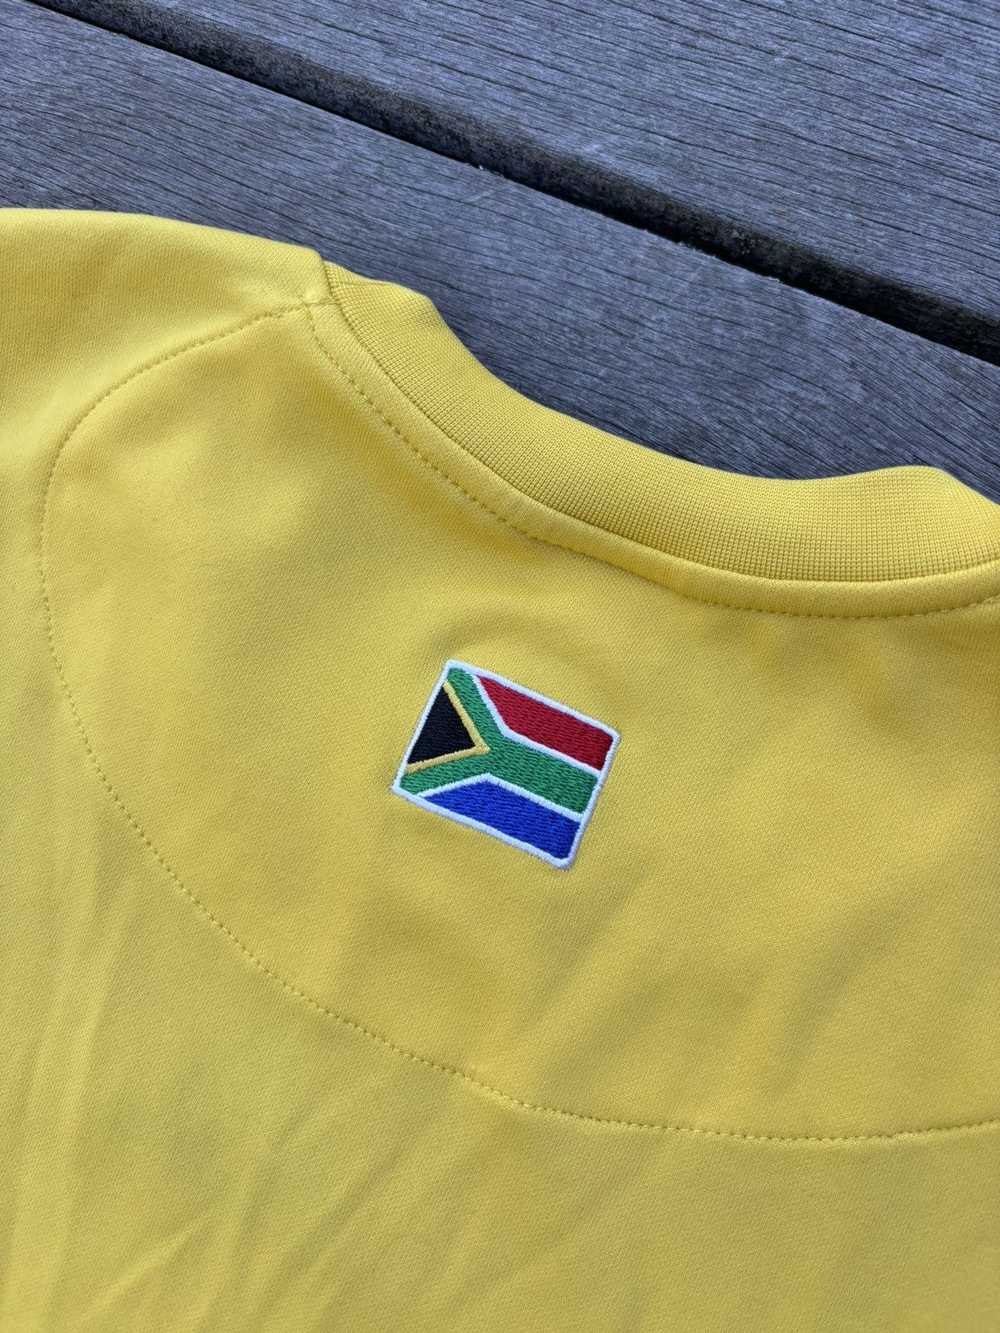 Adidas × Soccer Jersey × Streetwear South Africa … - image 5